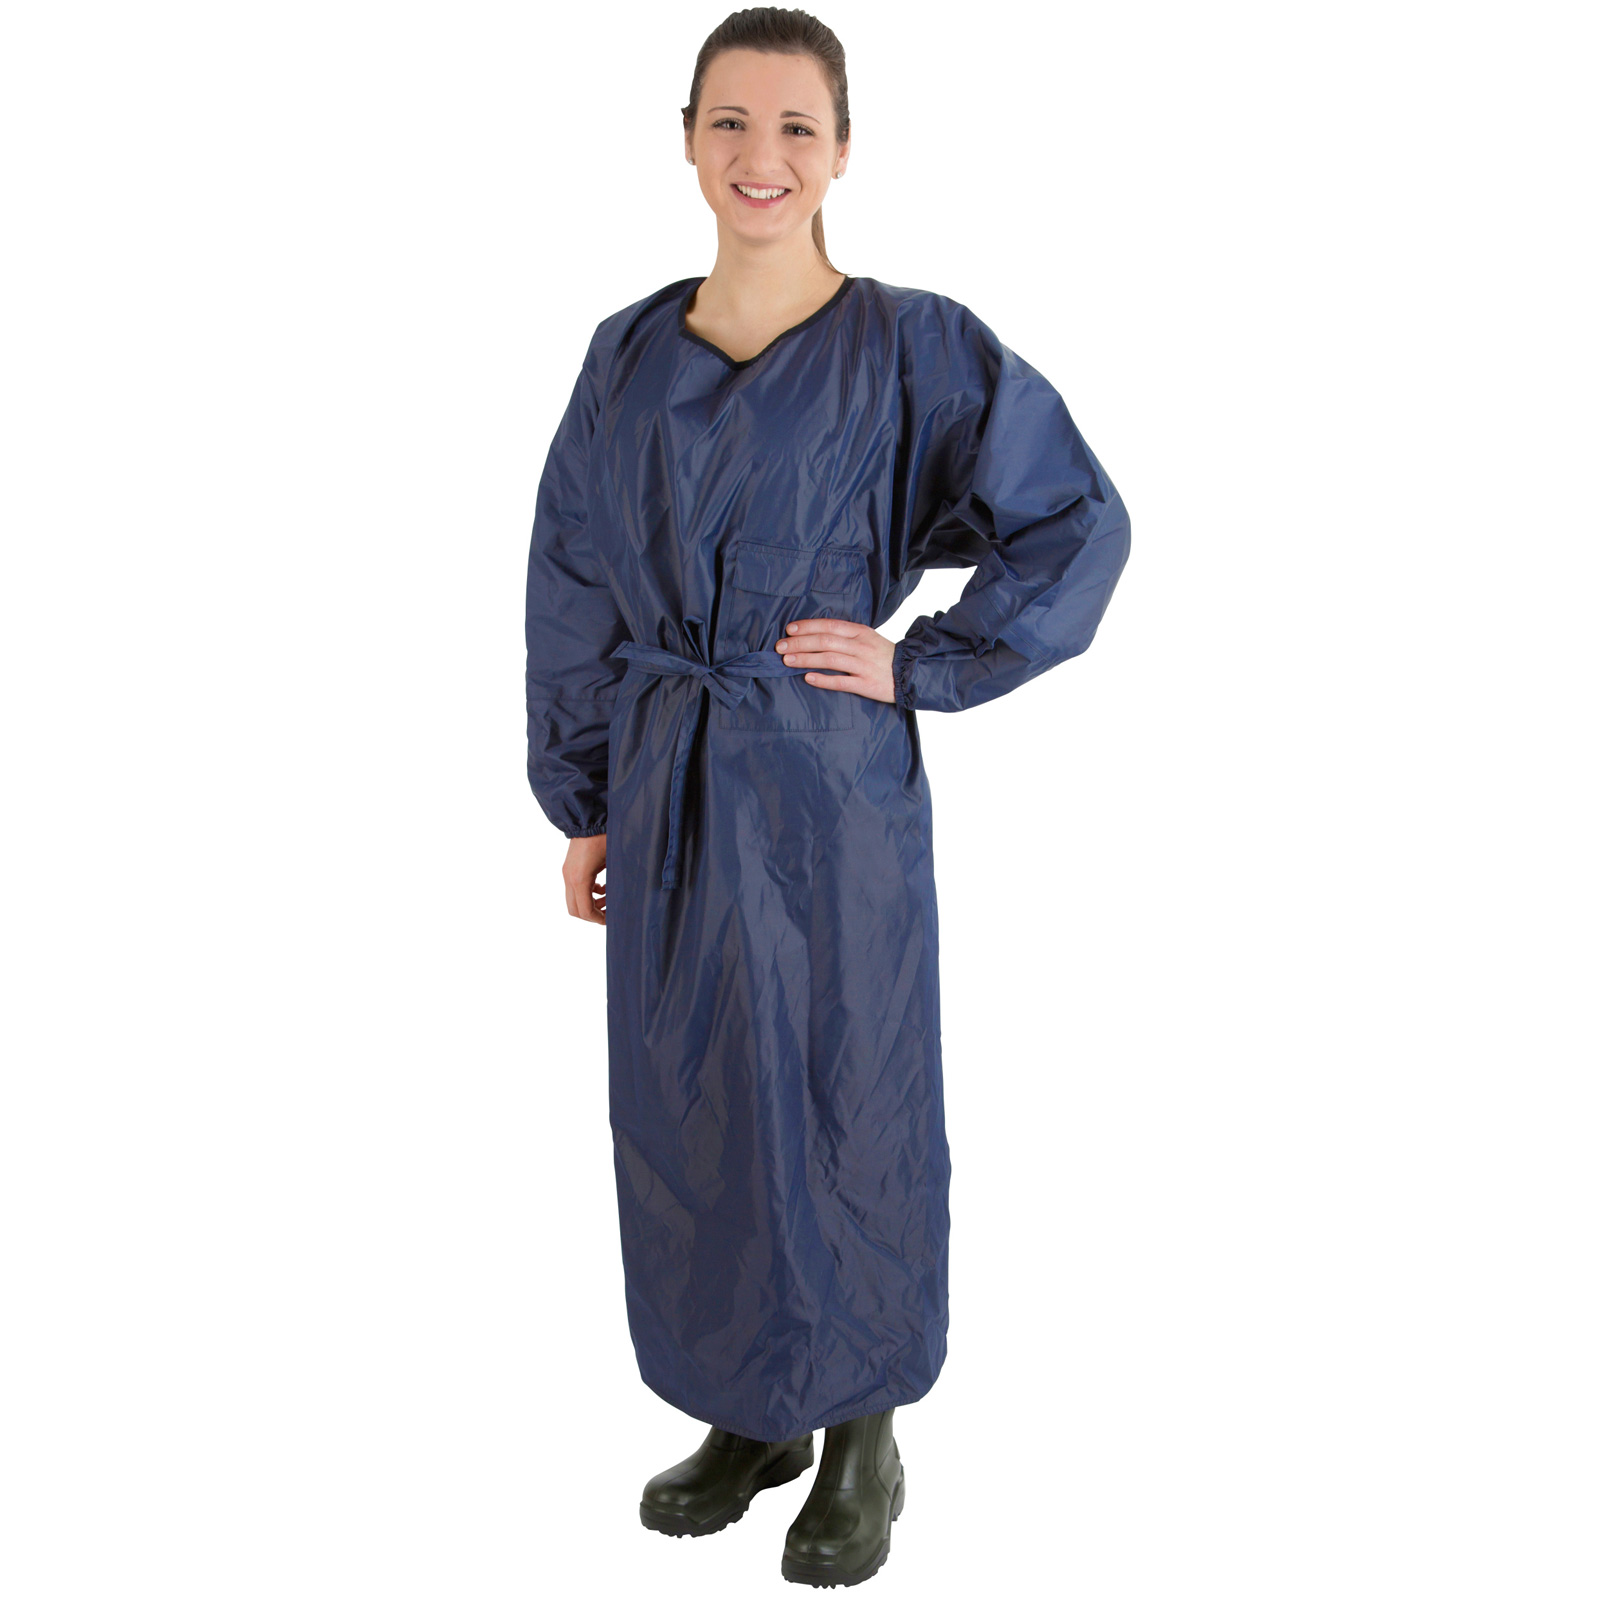 Milking & Washing Apron with Sleeves, navy